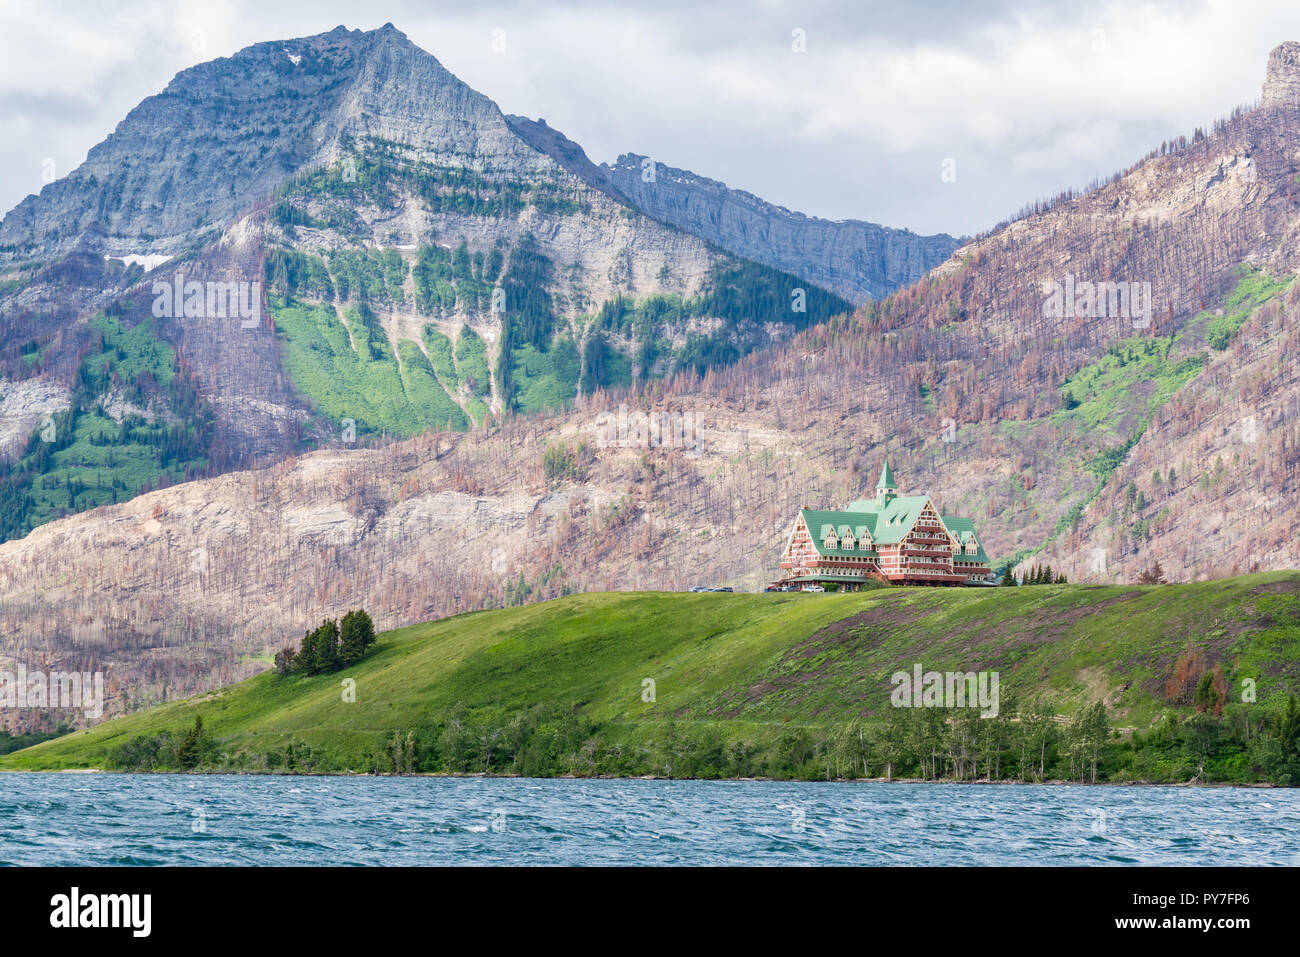 WATERTON, CANADA - JULY 1, 2018: The historic Prince of Wales Hotel in Waterton Lakes National Park, was built in 1927 Stock Photo